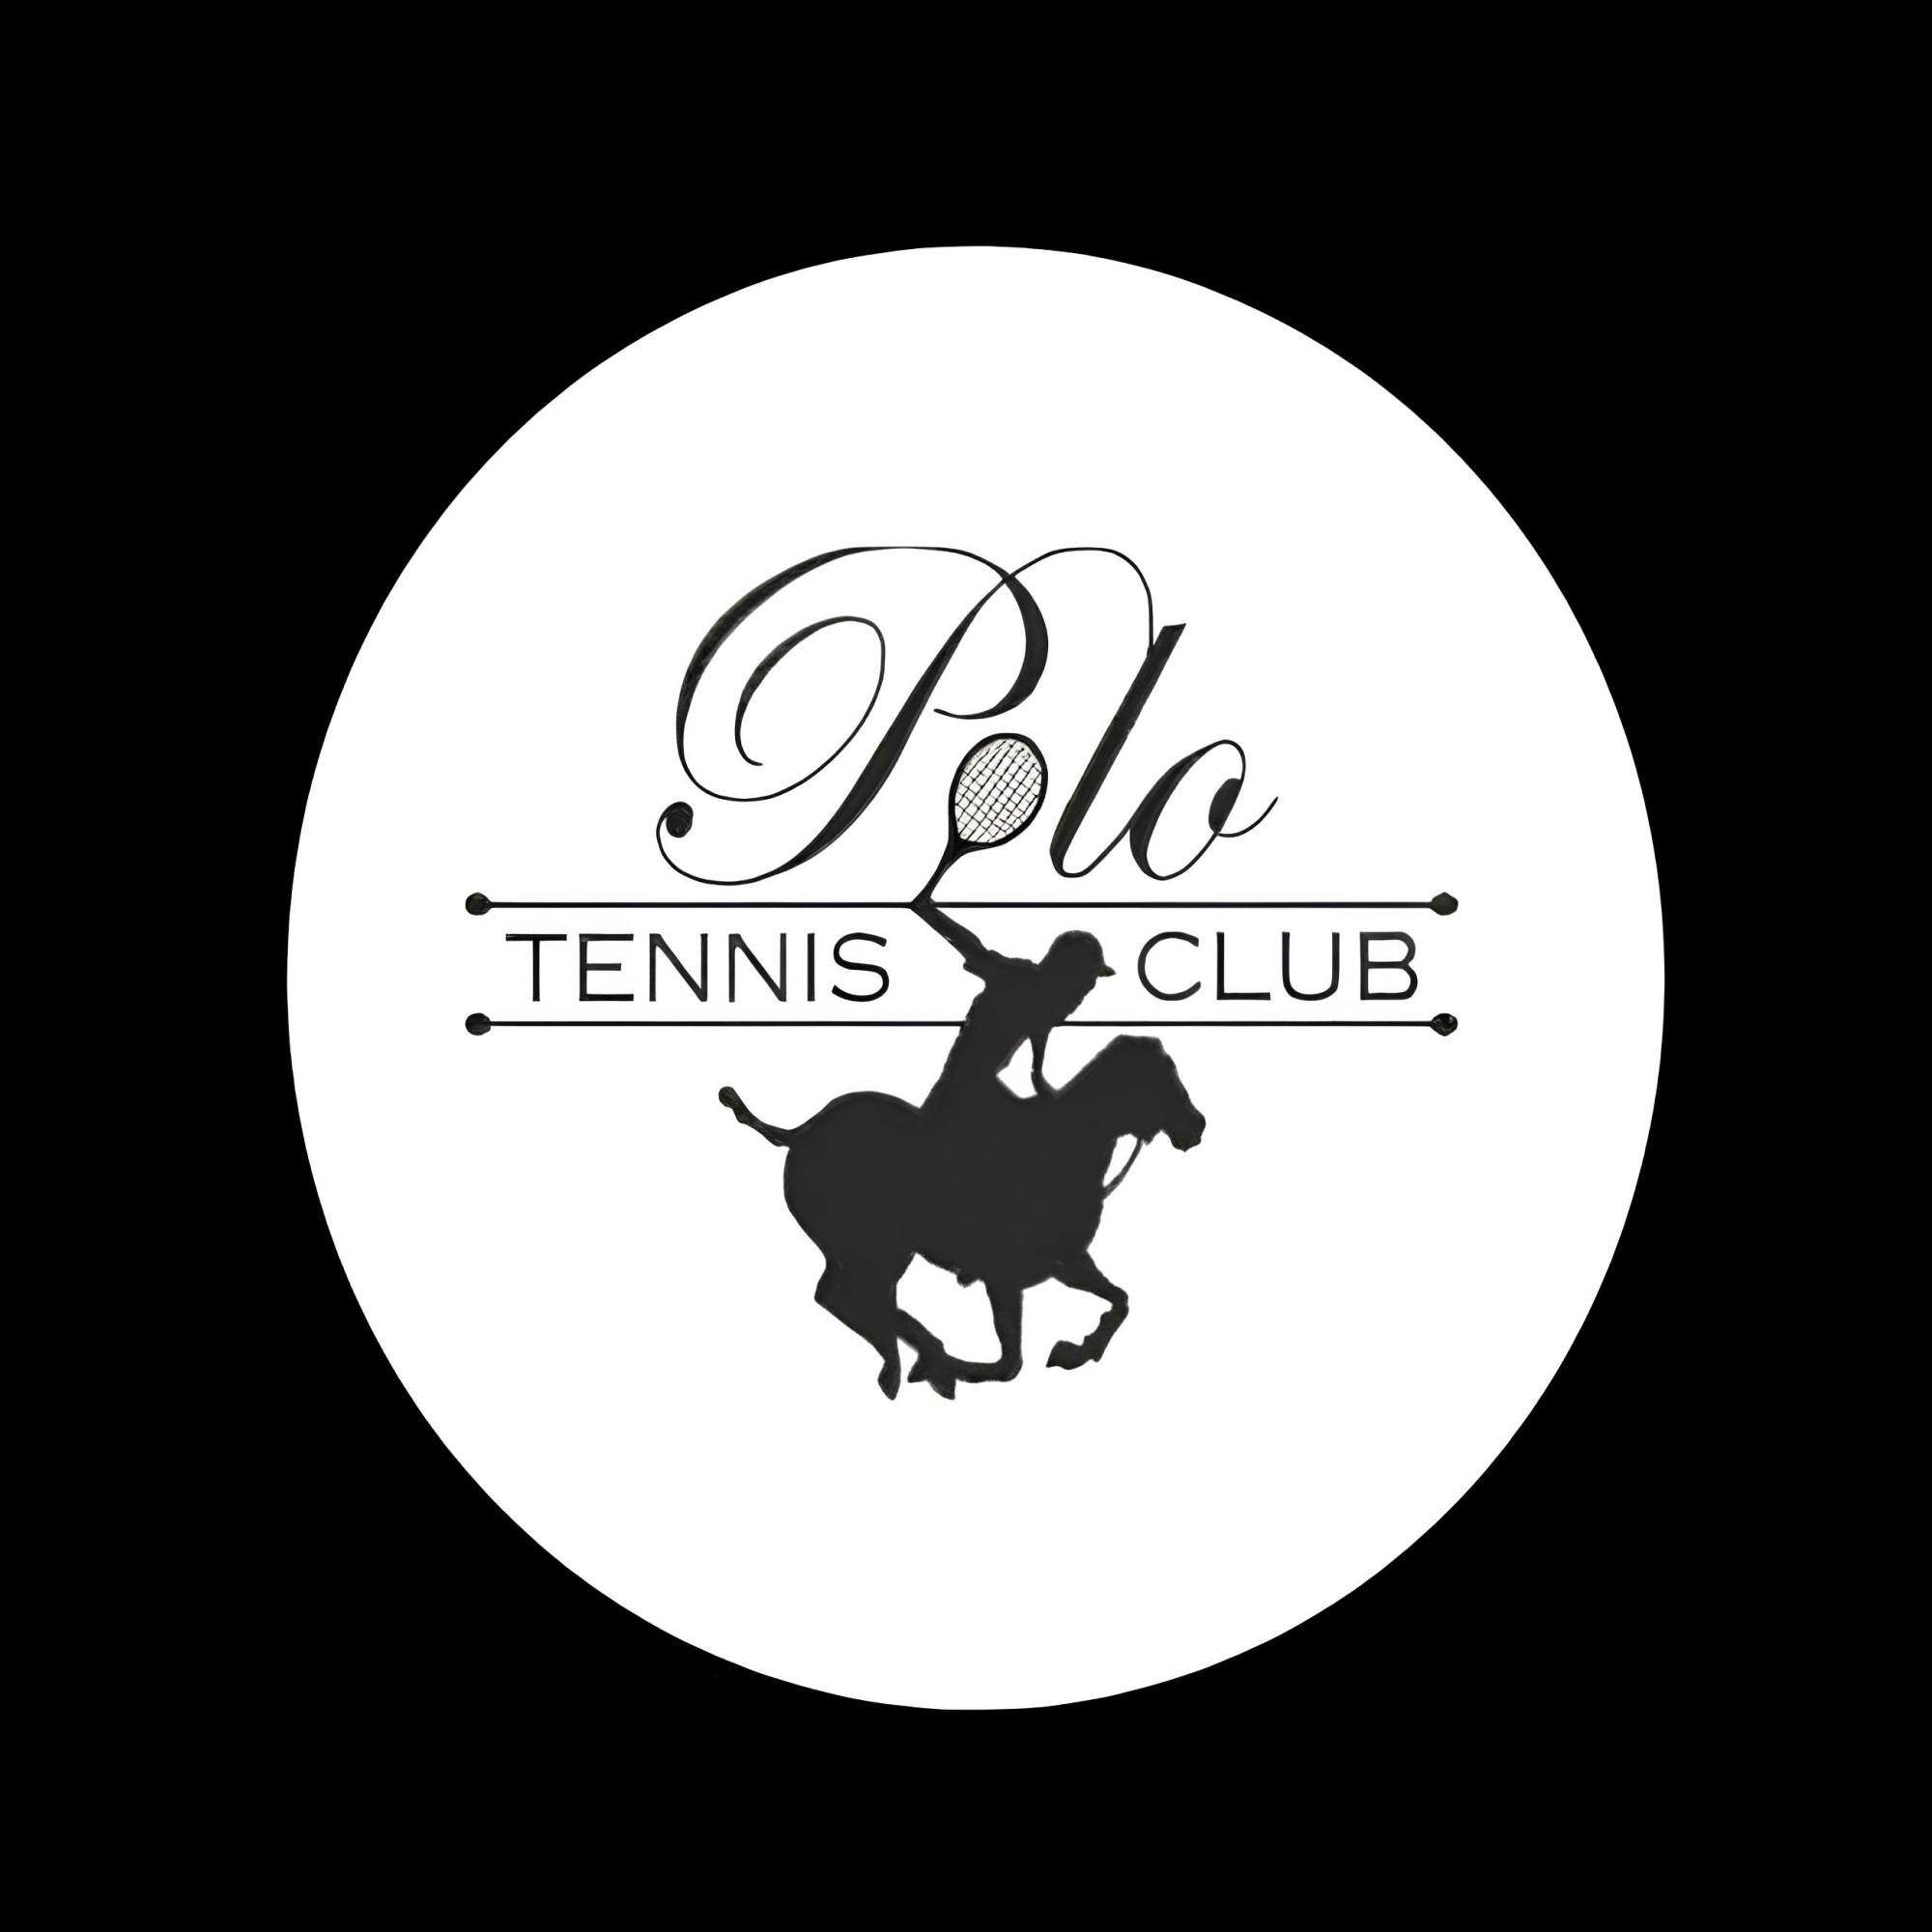 Image 1 of 11 of Polo Tennis and Fitness Club court